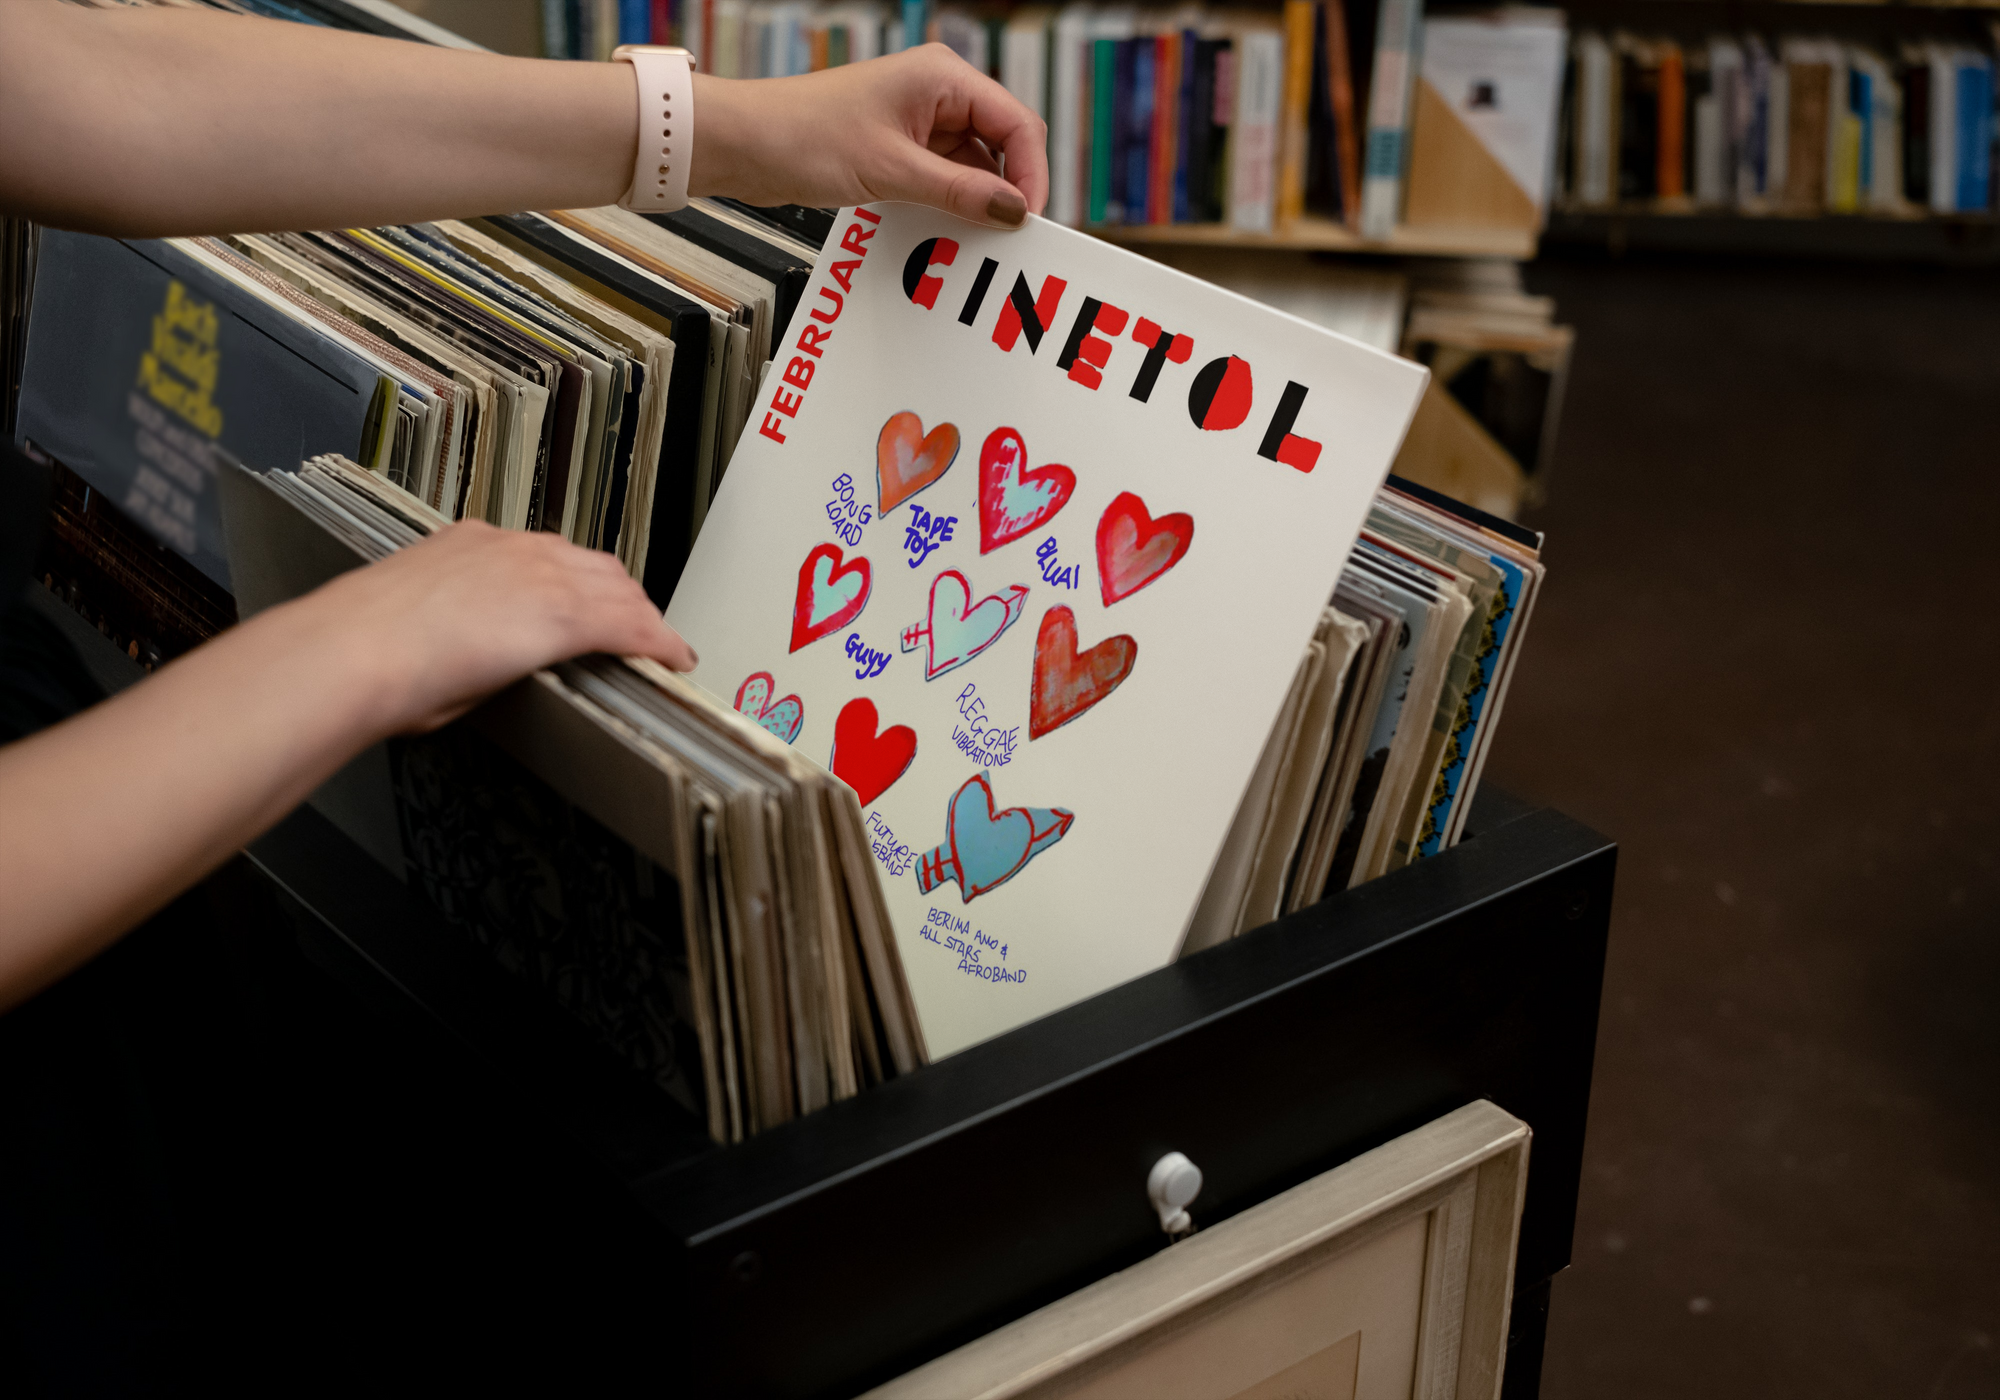 a person holding a vinyl record in front of a bookshelf with cinetol and hearts on it